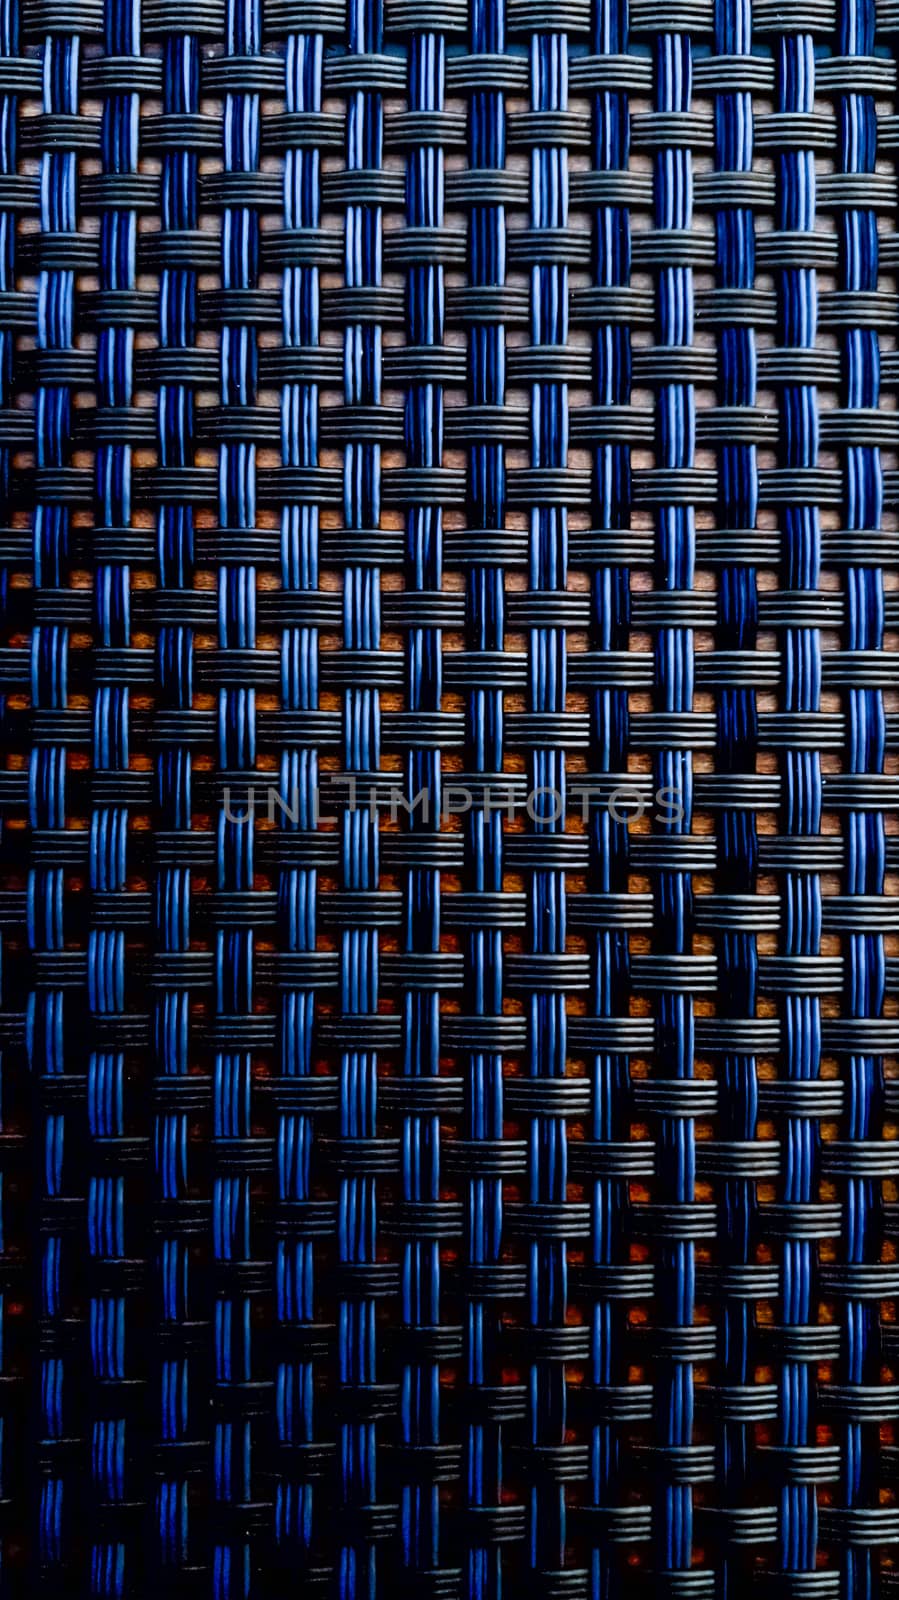 a pattern of wooden in dark blue color.